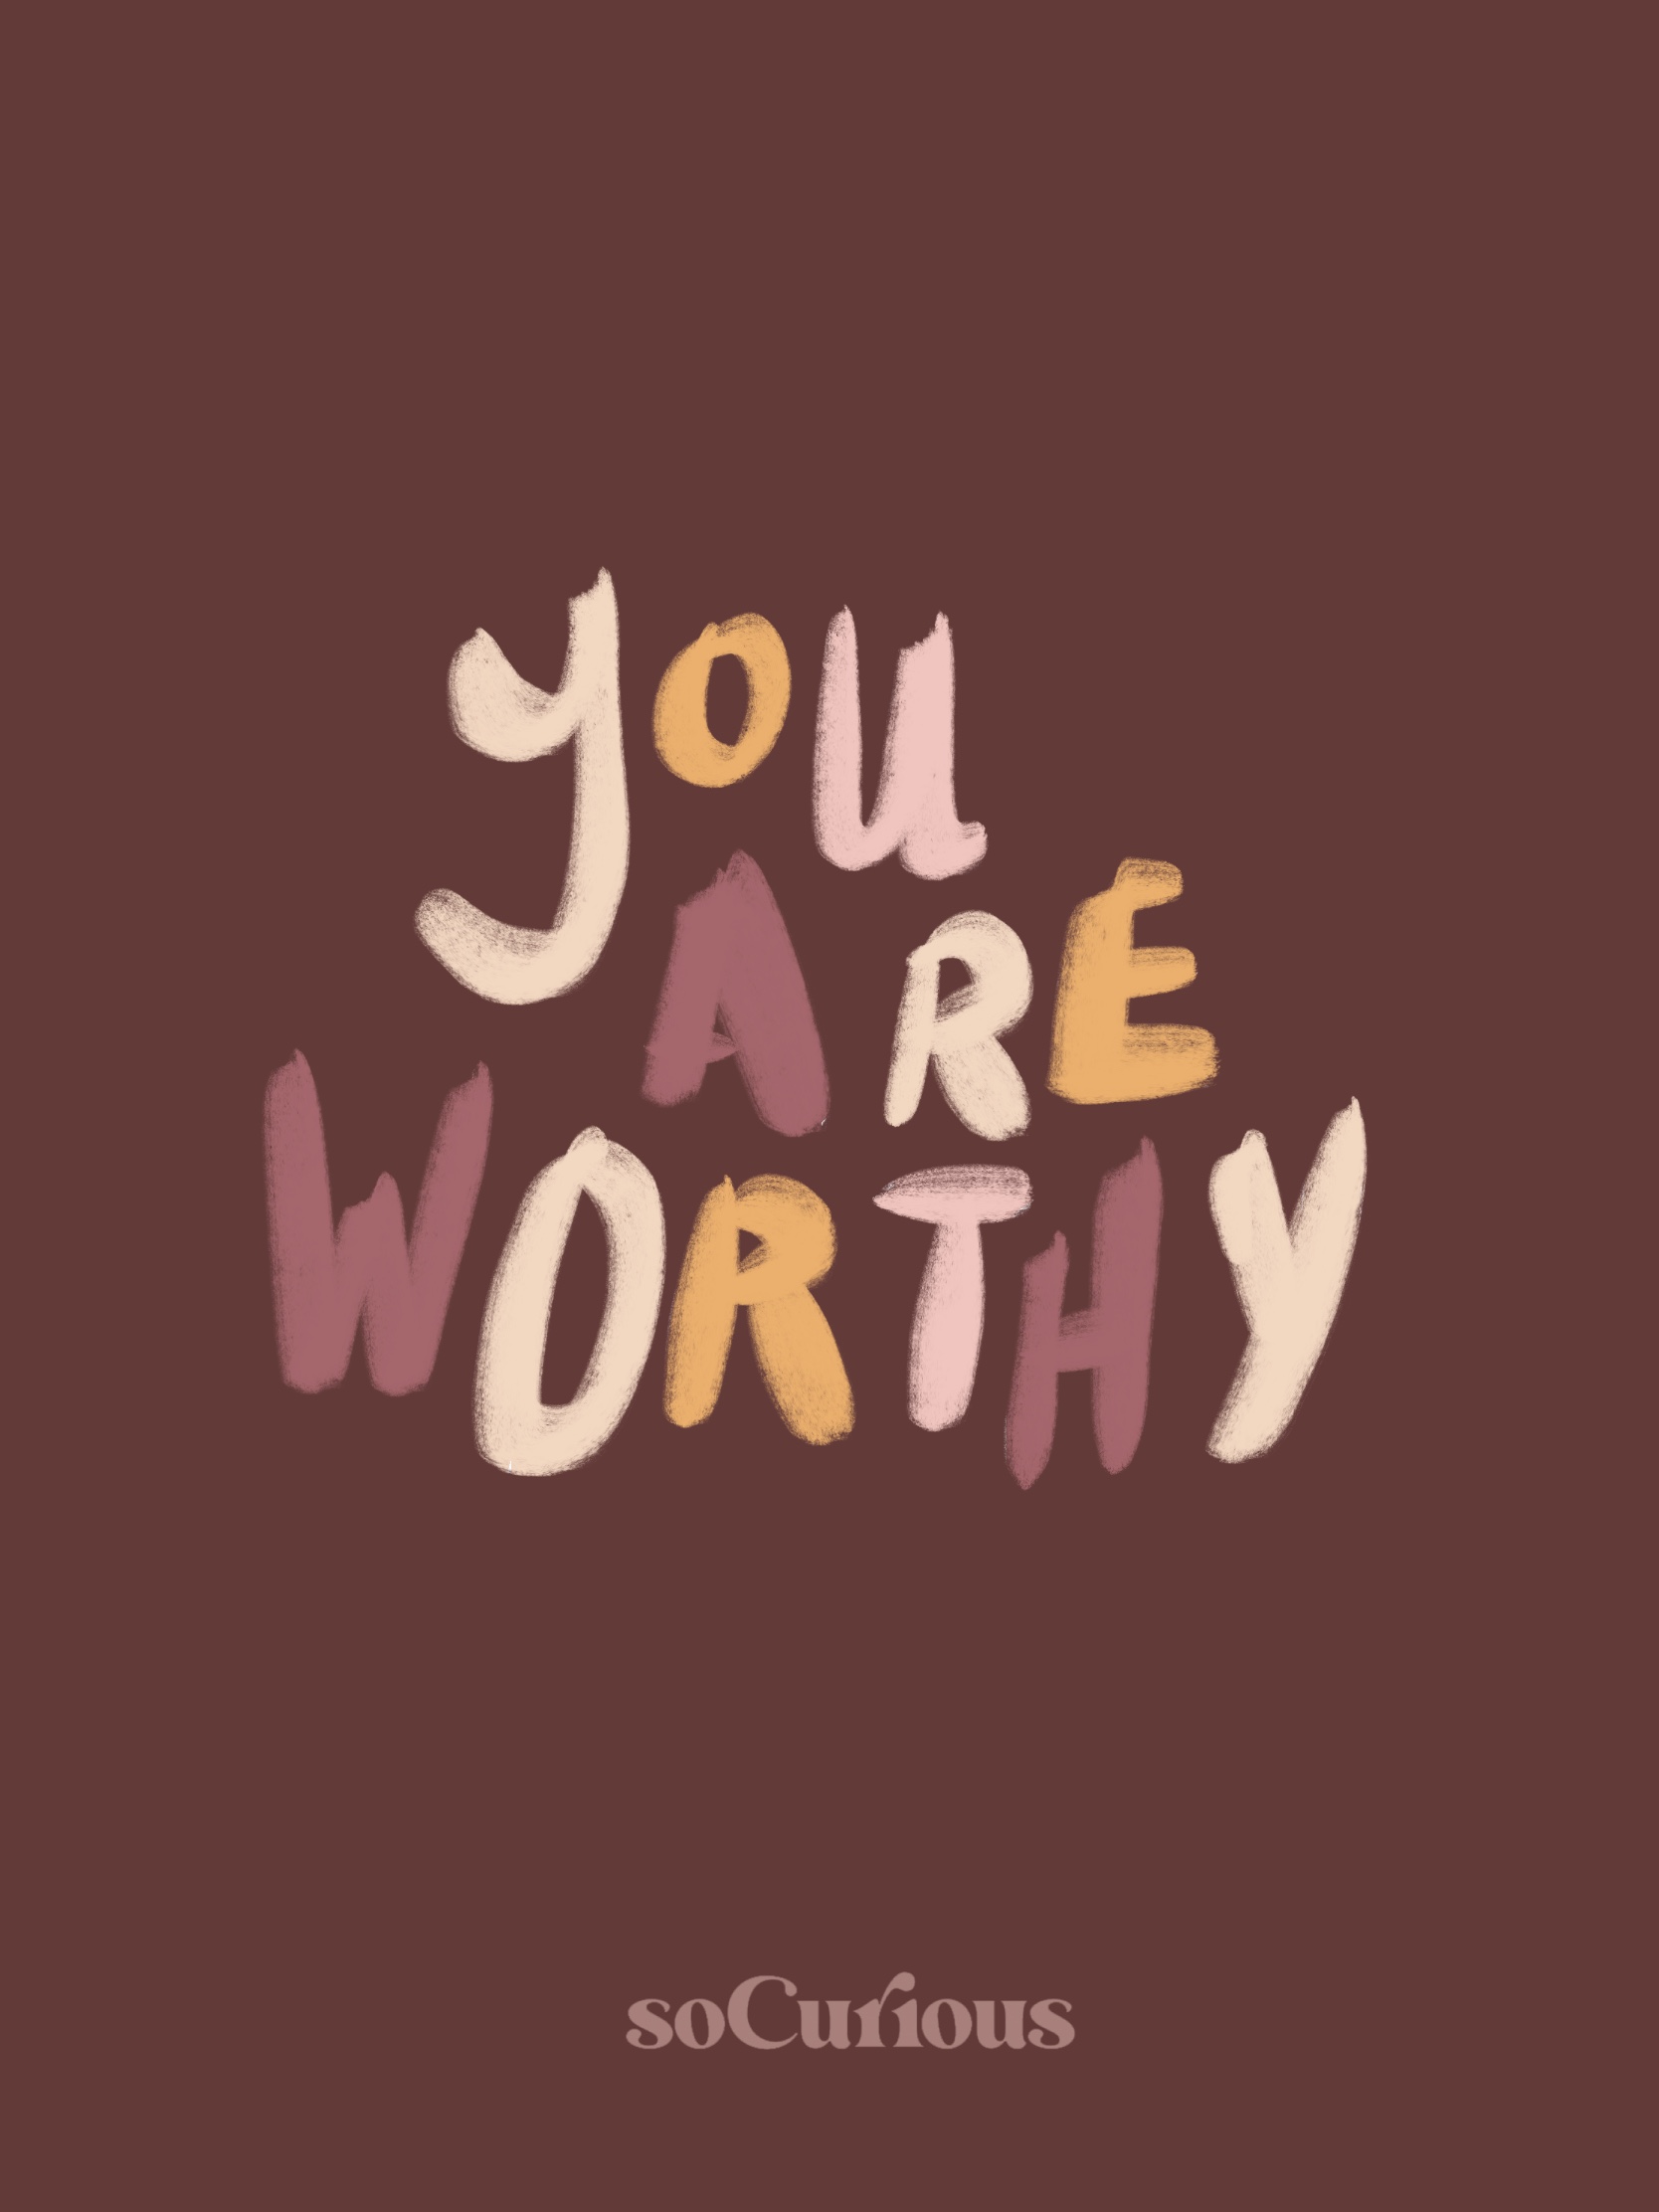 You are already worthy